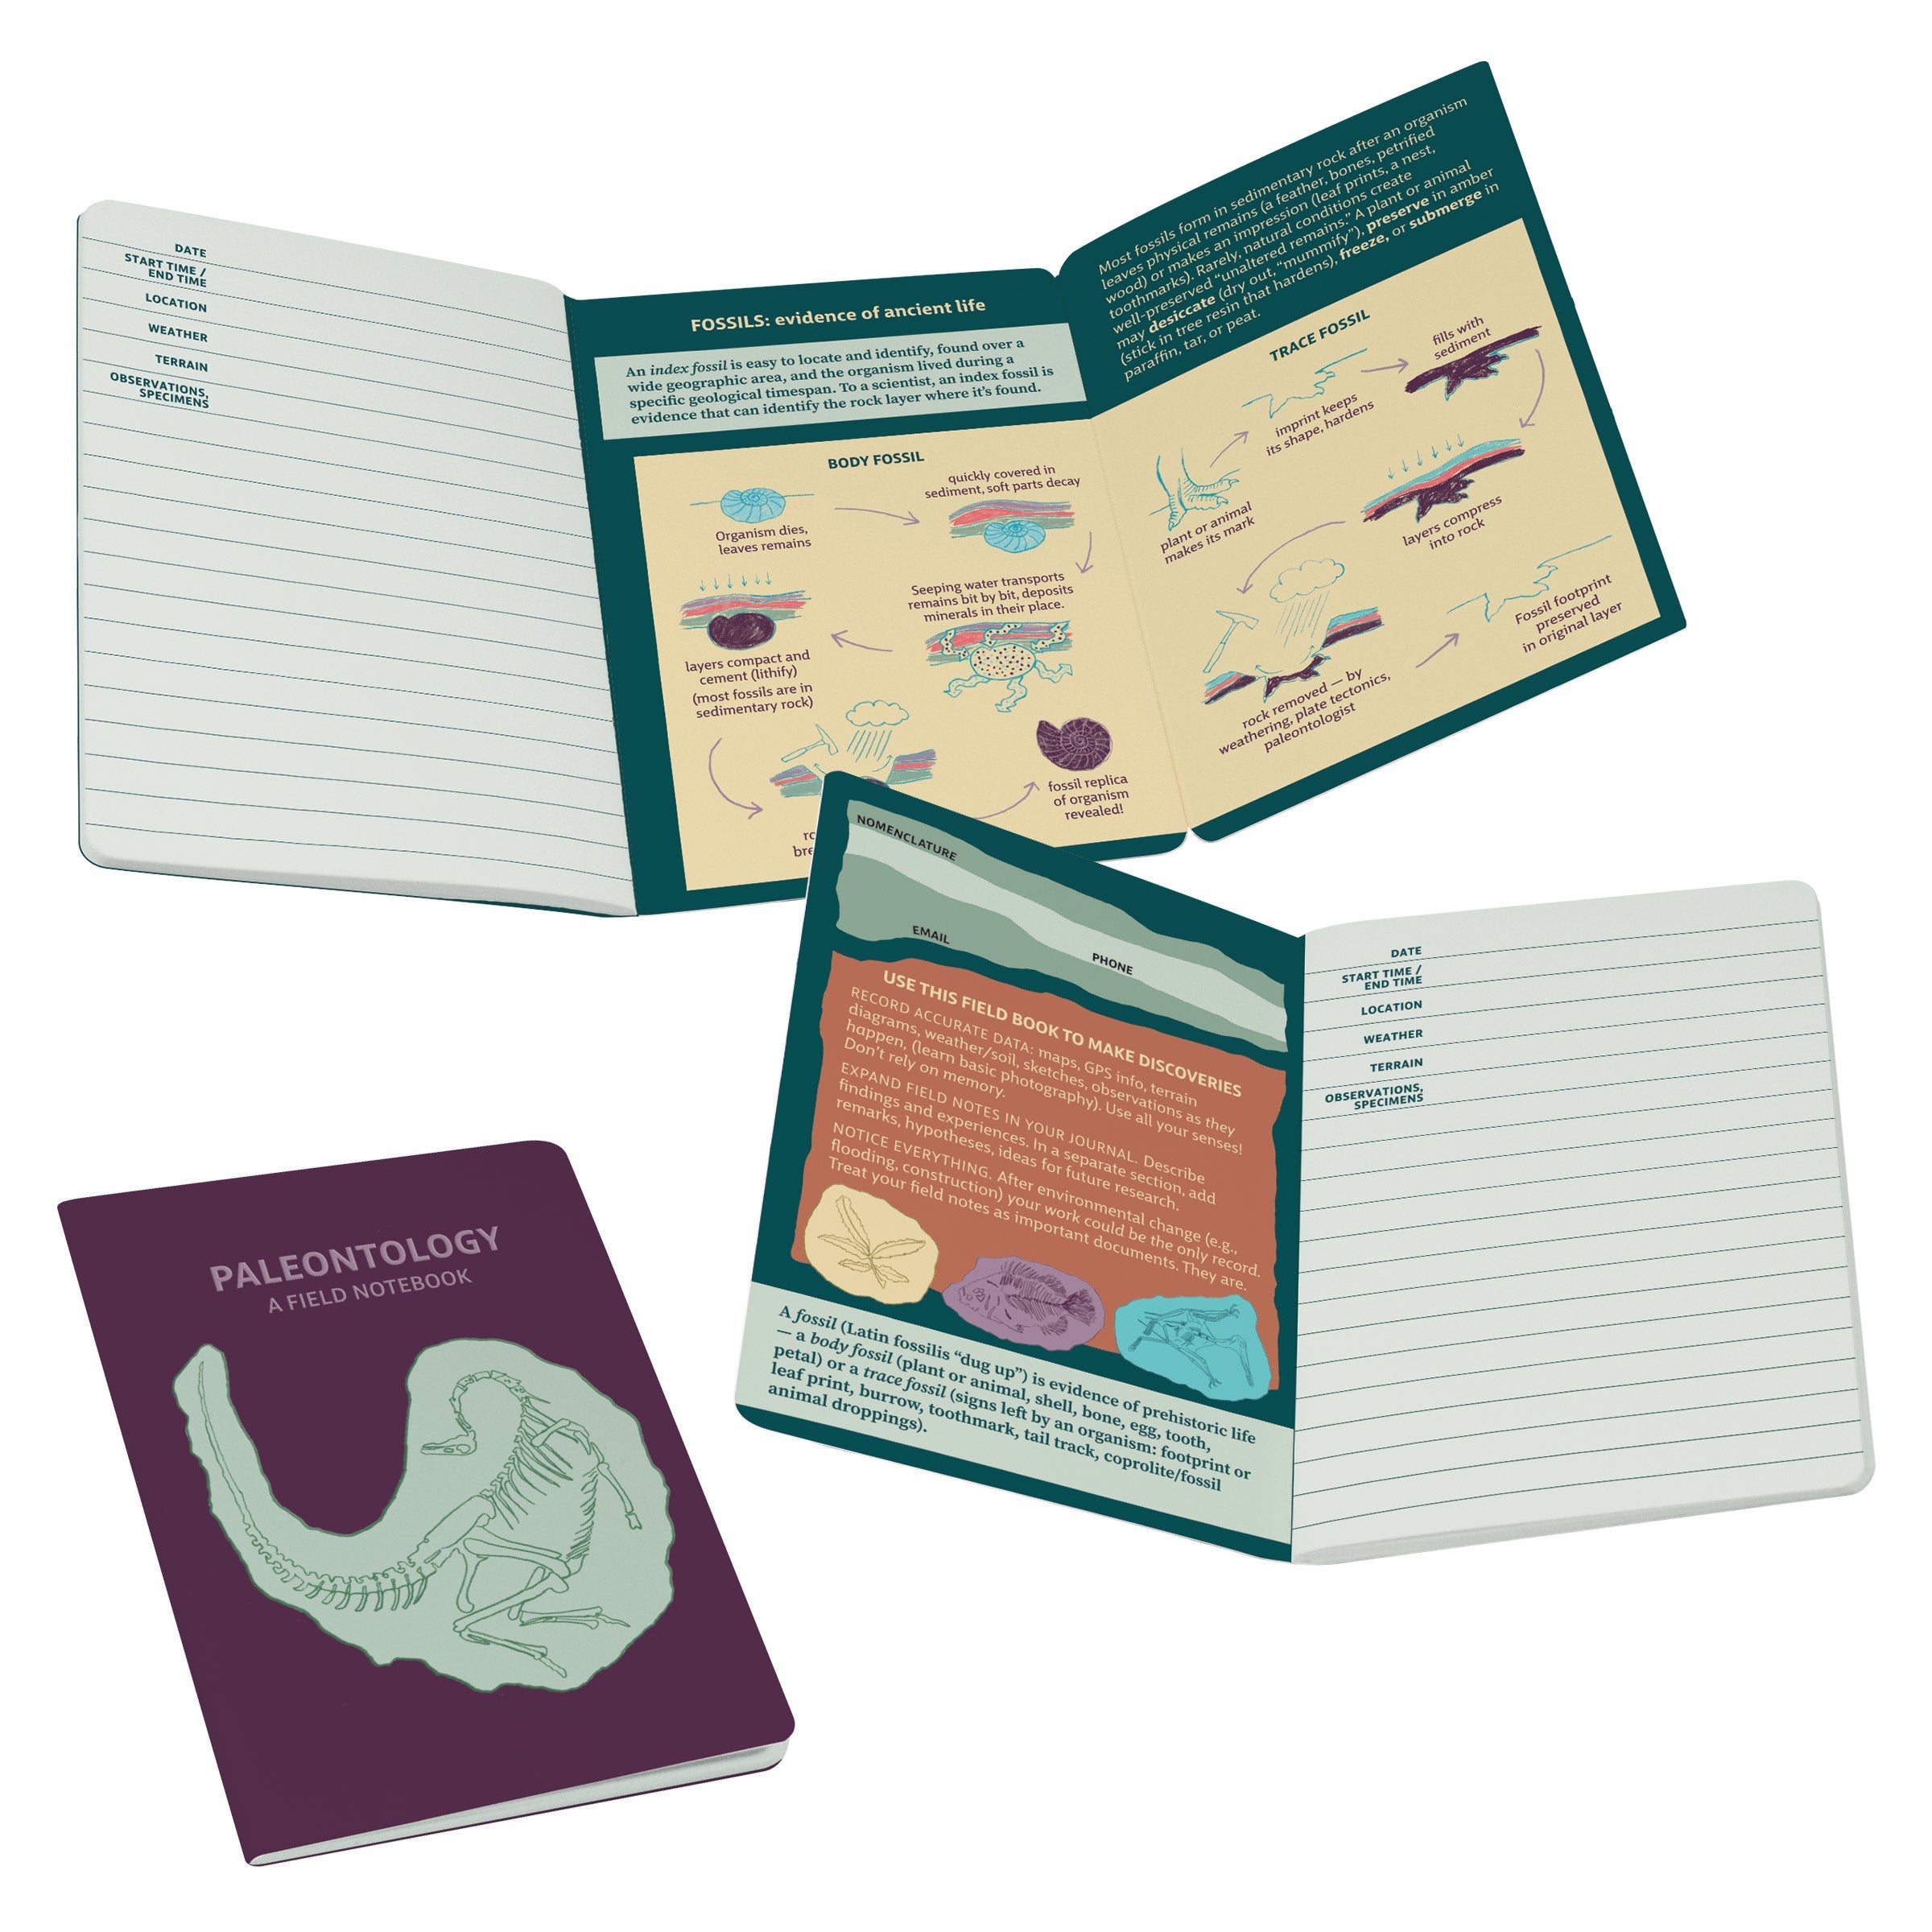 Product photo of Paleontology Notebook, a novelty gift manufactured by The Unemployed Philosophers Guild.